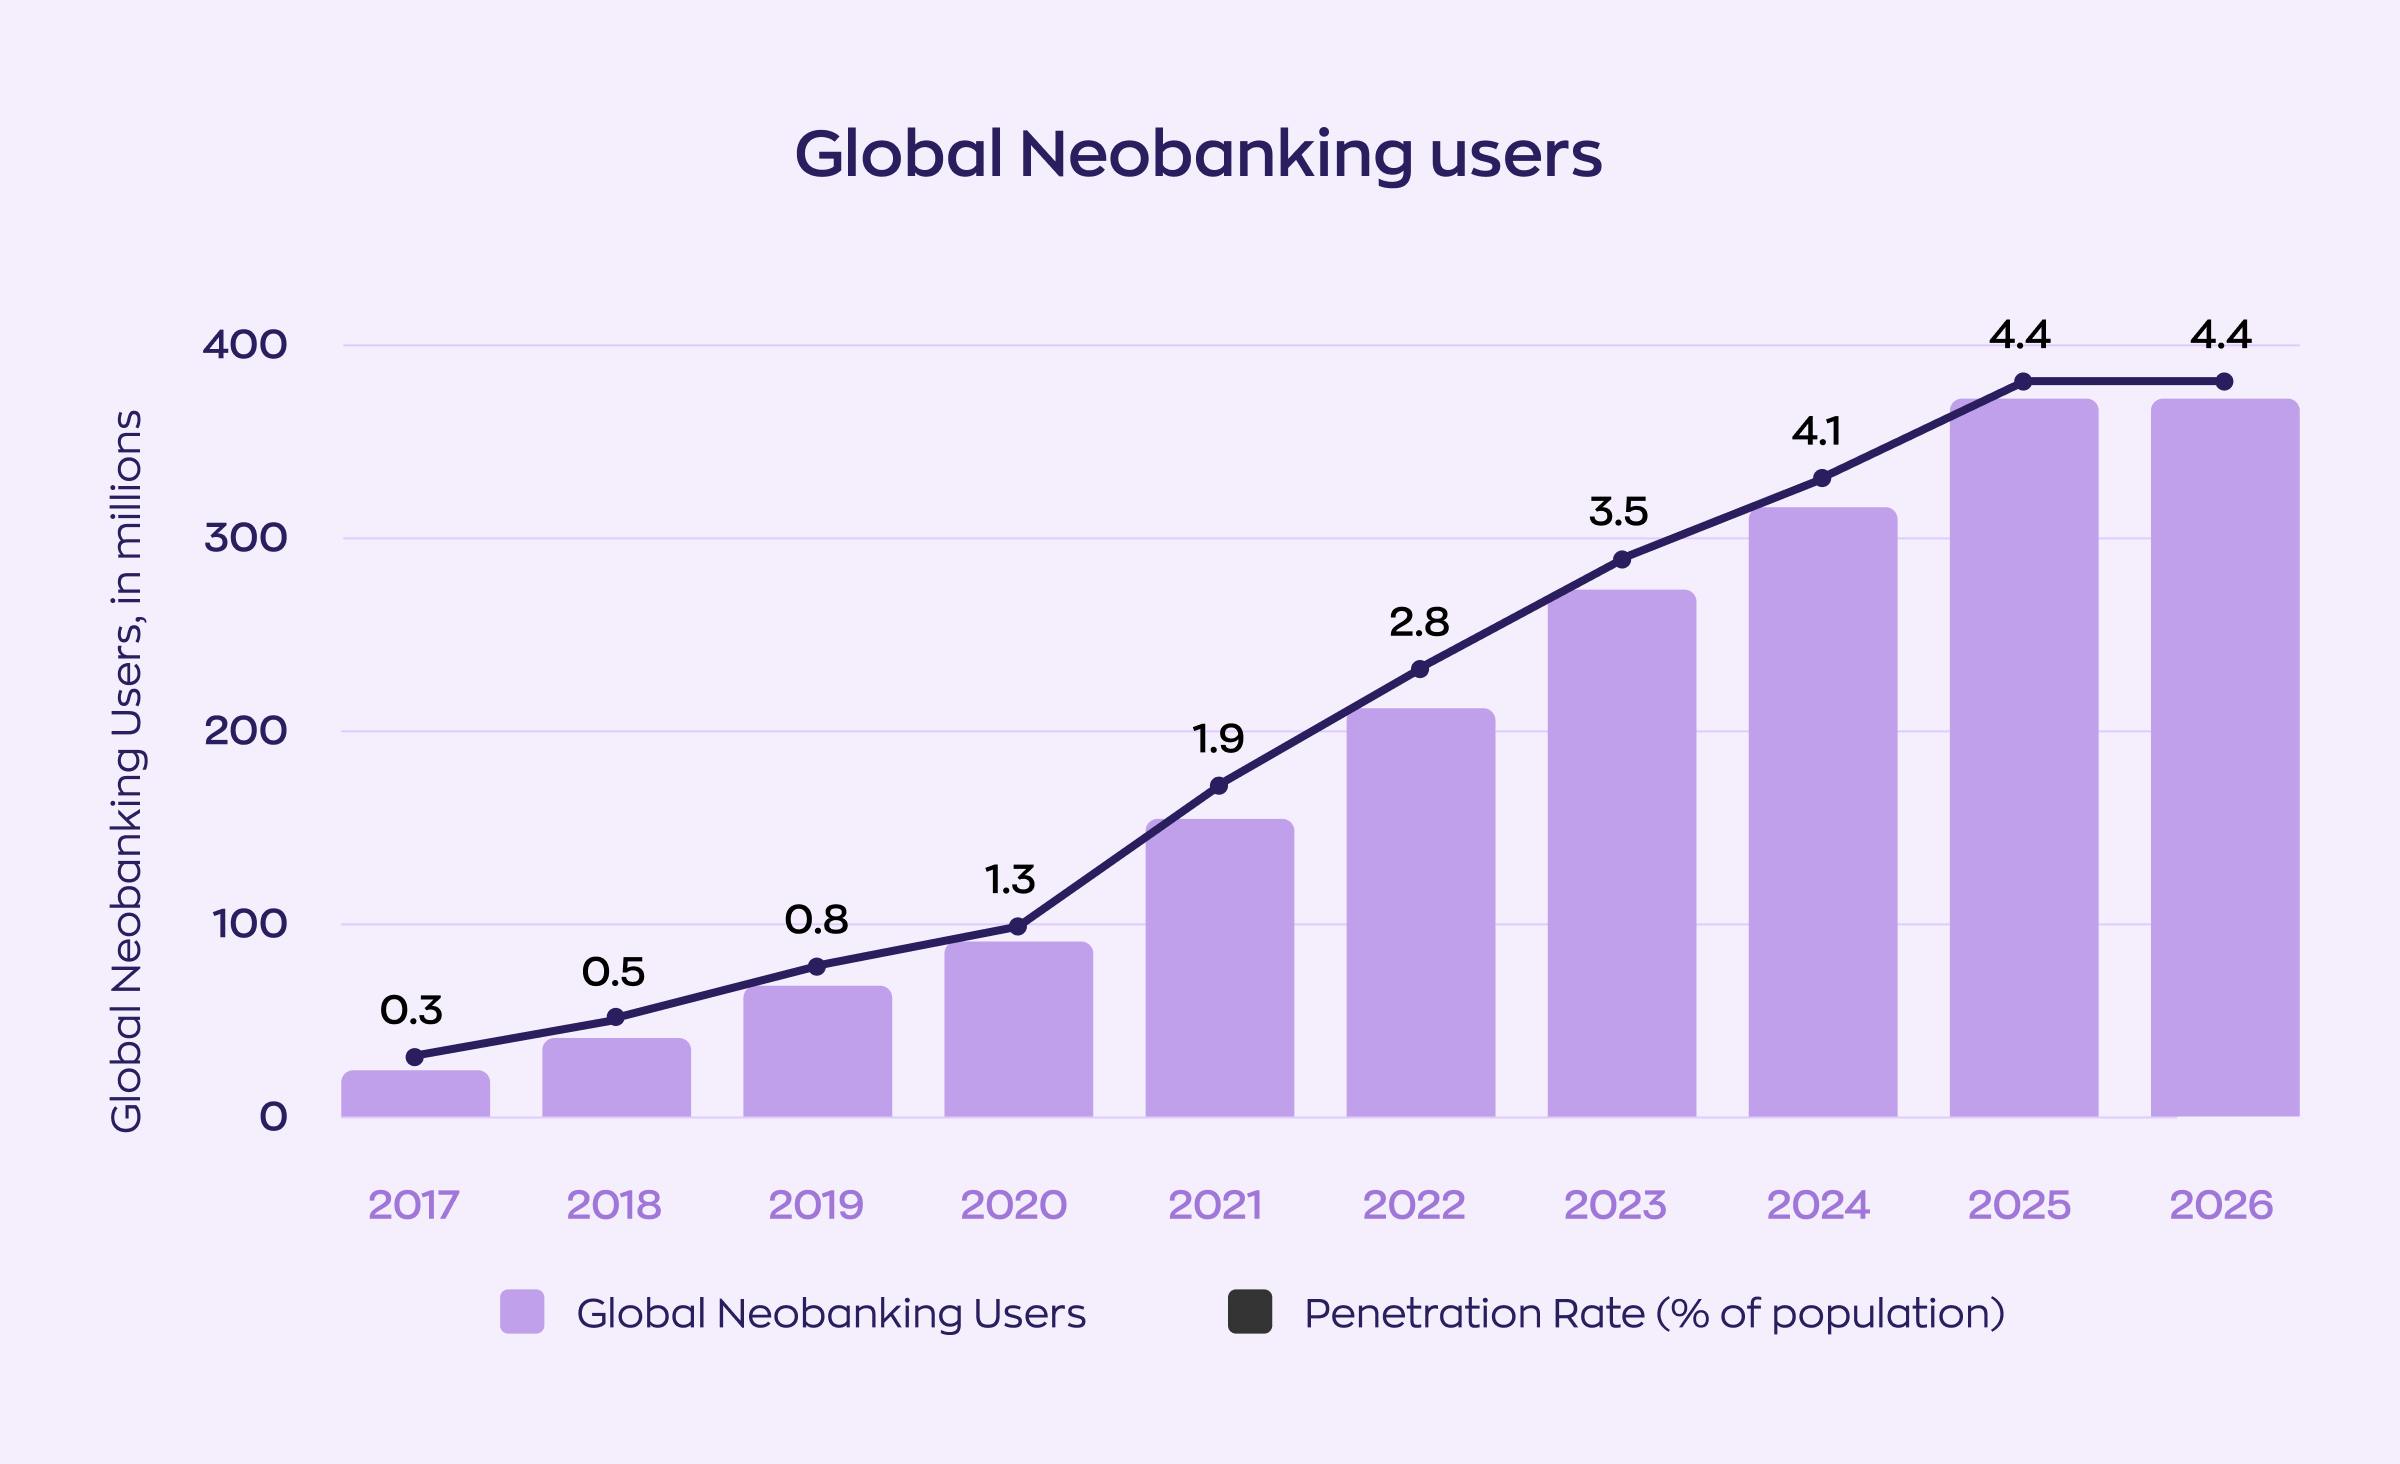 The number of global neobanking users is projected to grow